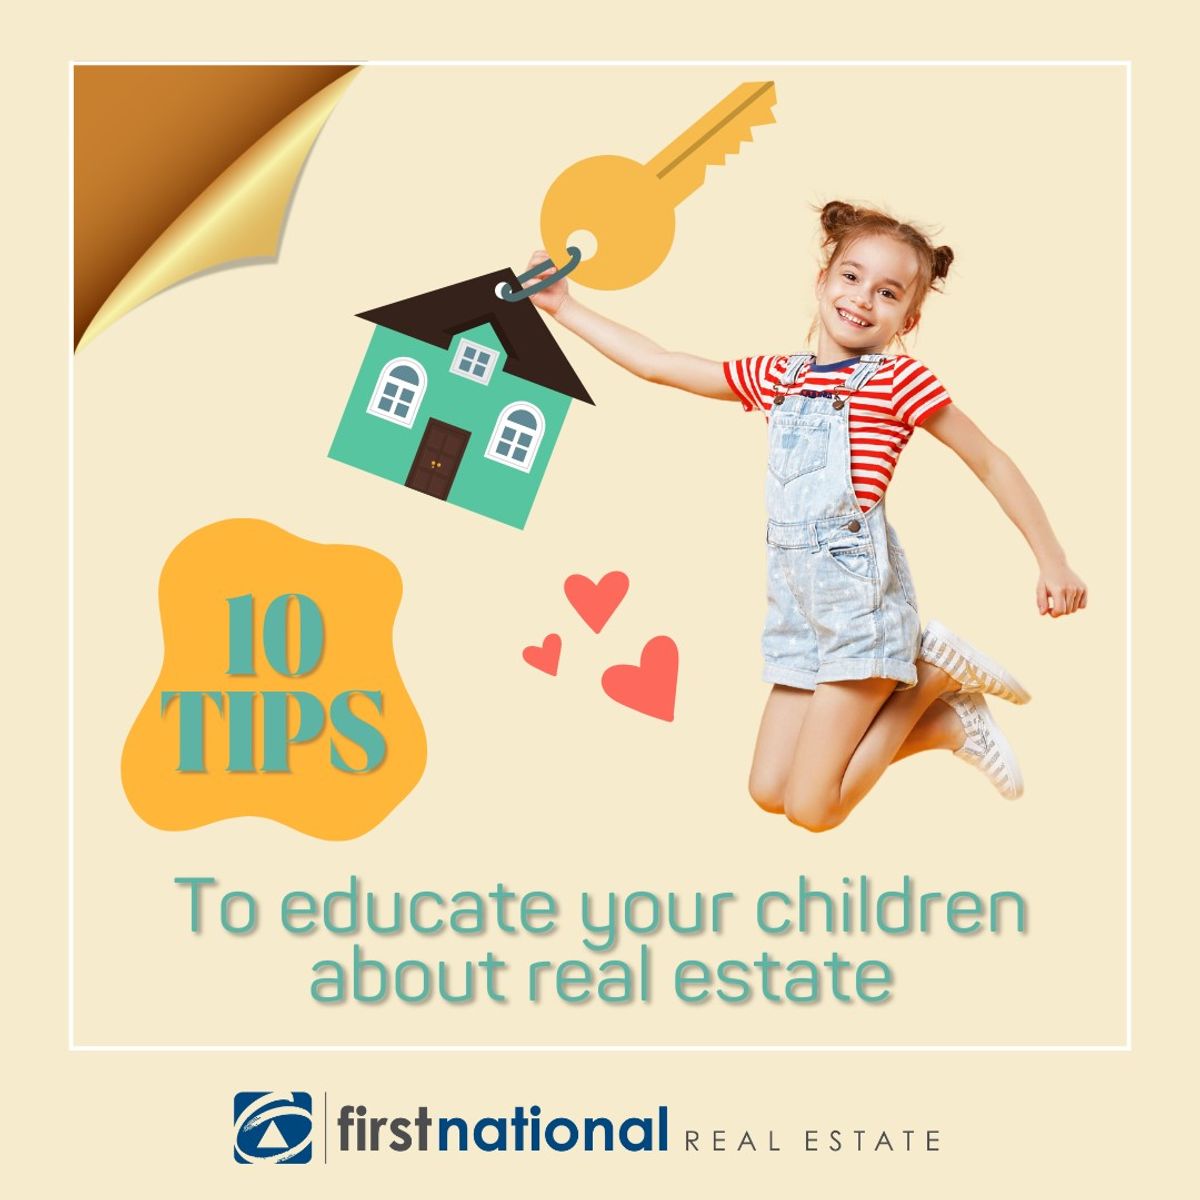 Empowering the next generation - Ten tips to educate your children about real estate literacy and homeownership